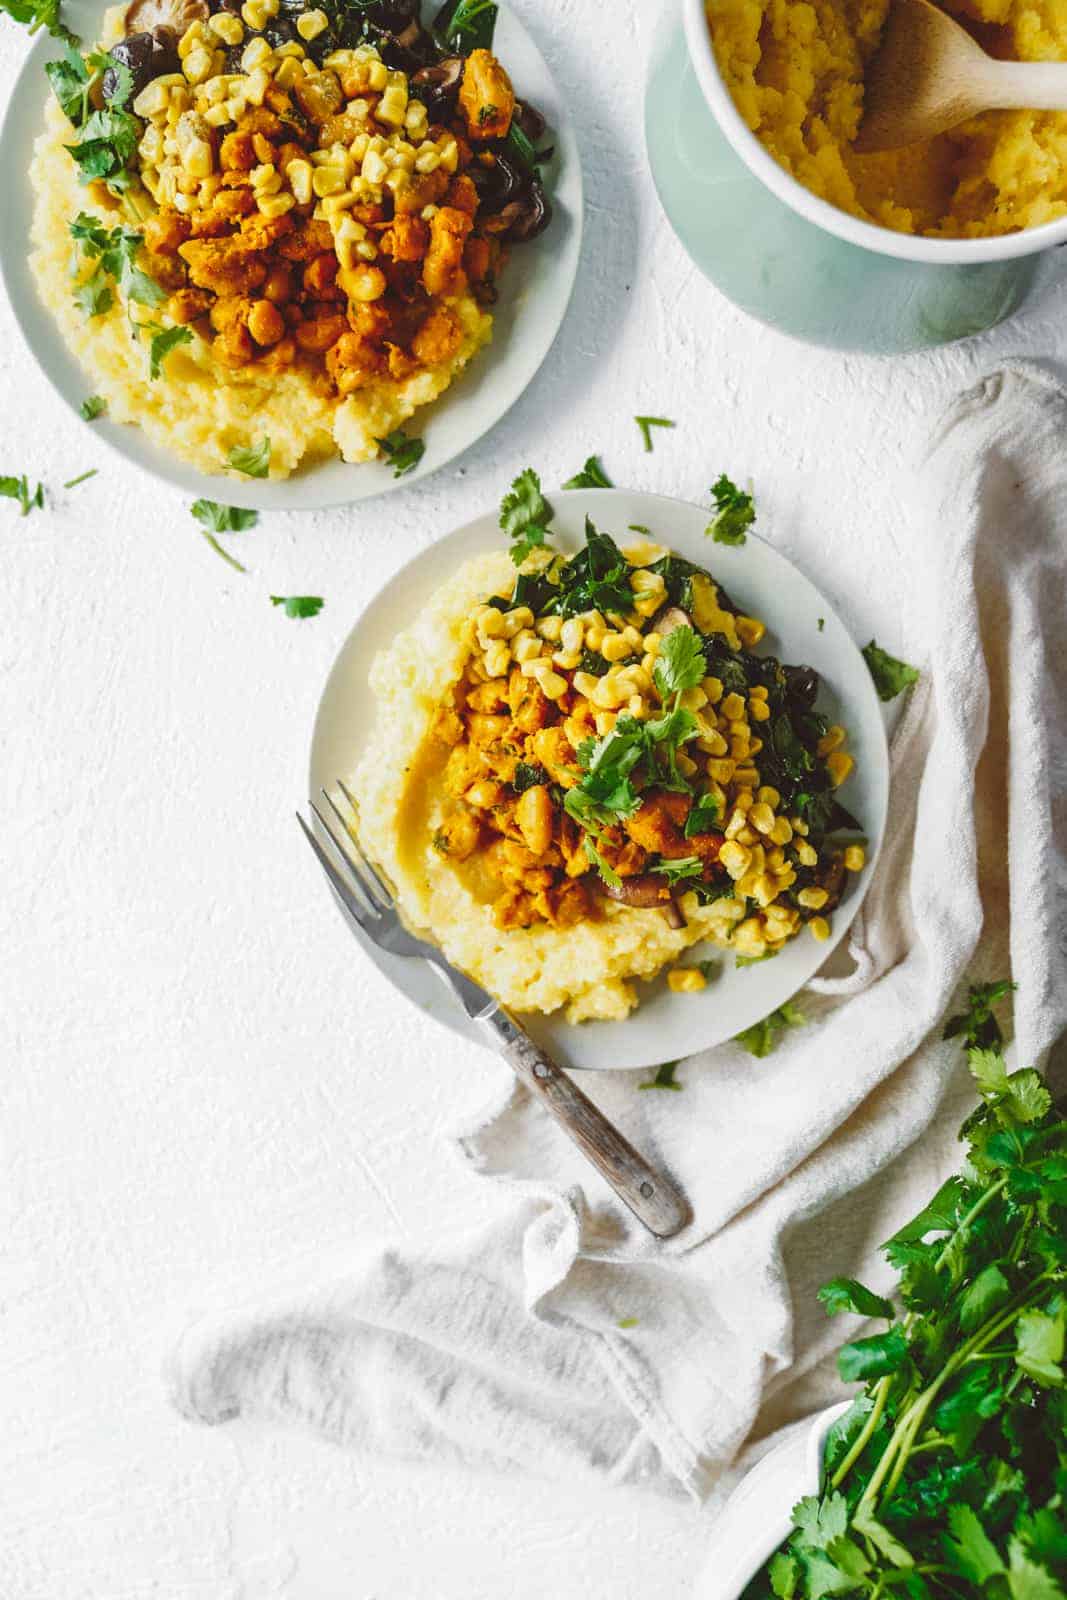 Delicious and easy to make vegan grits.